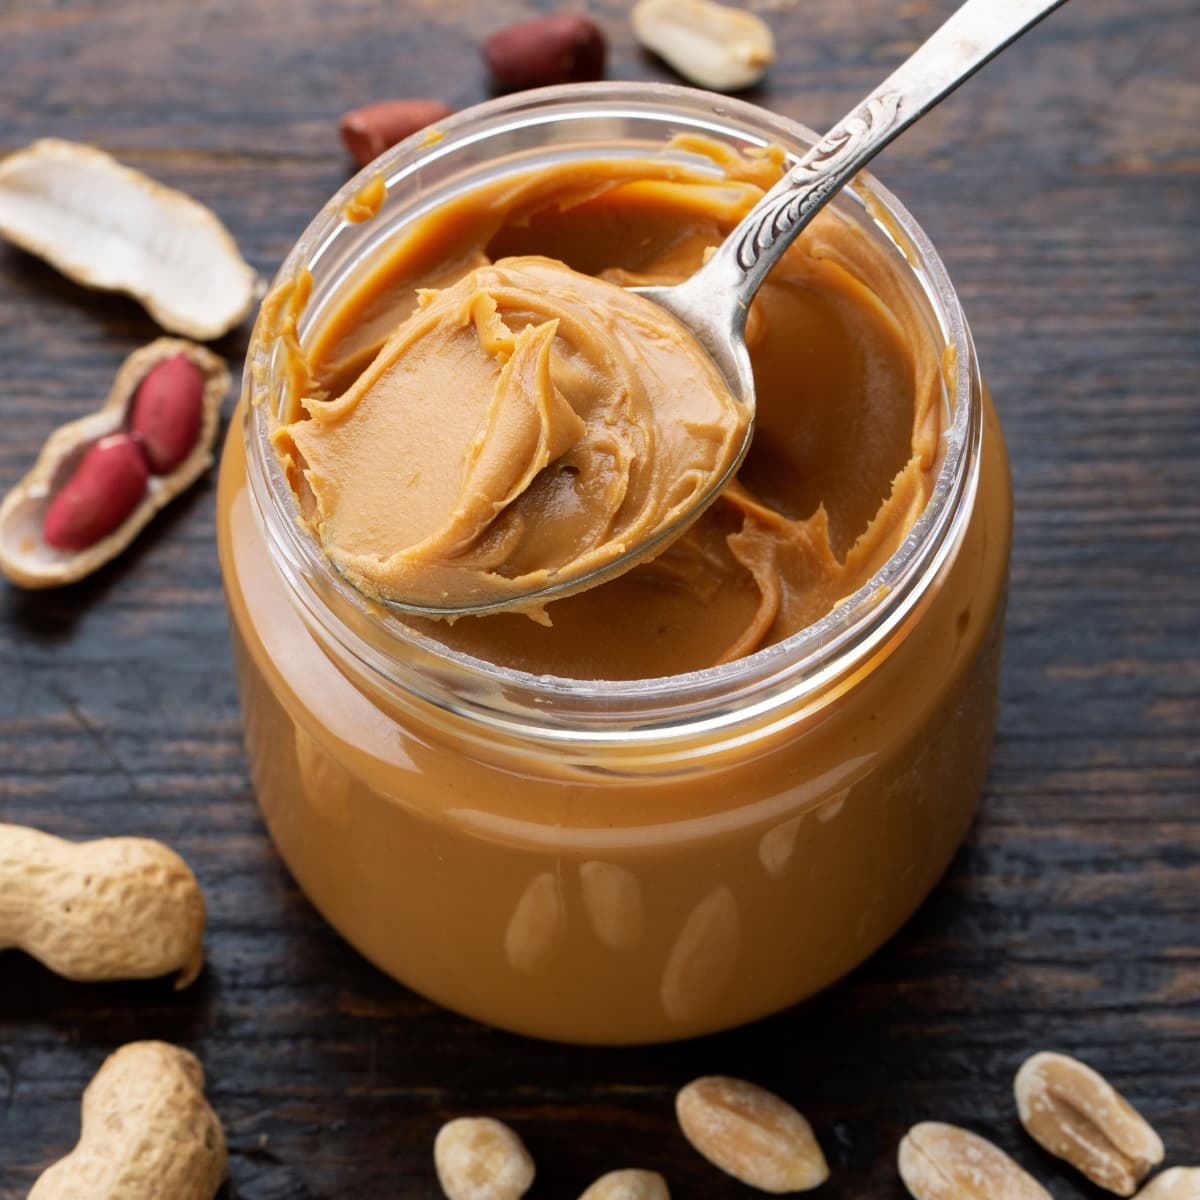 Peanut butter in a jar with a spoon on a wooden table